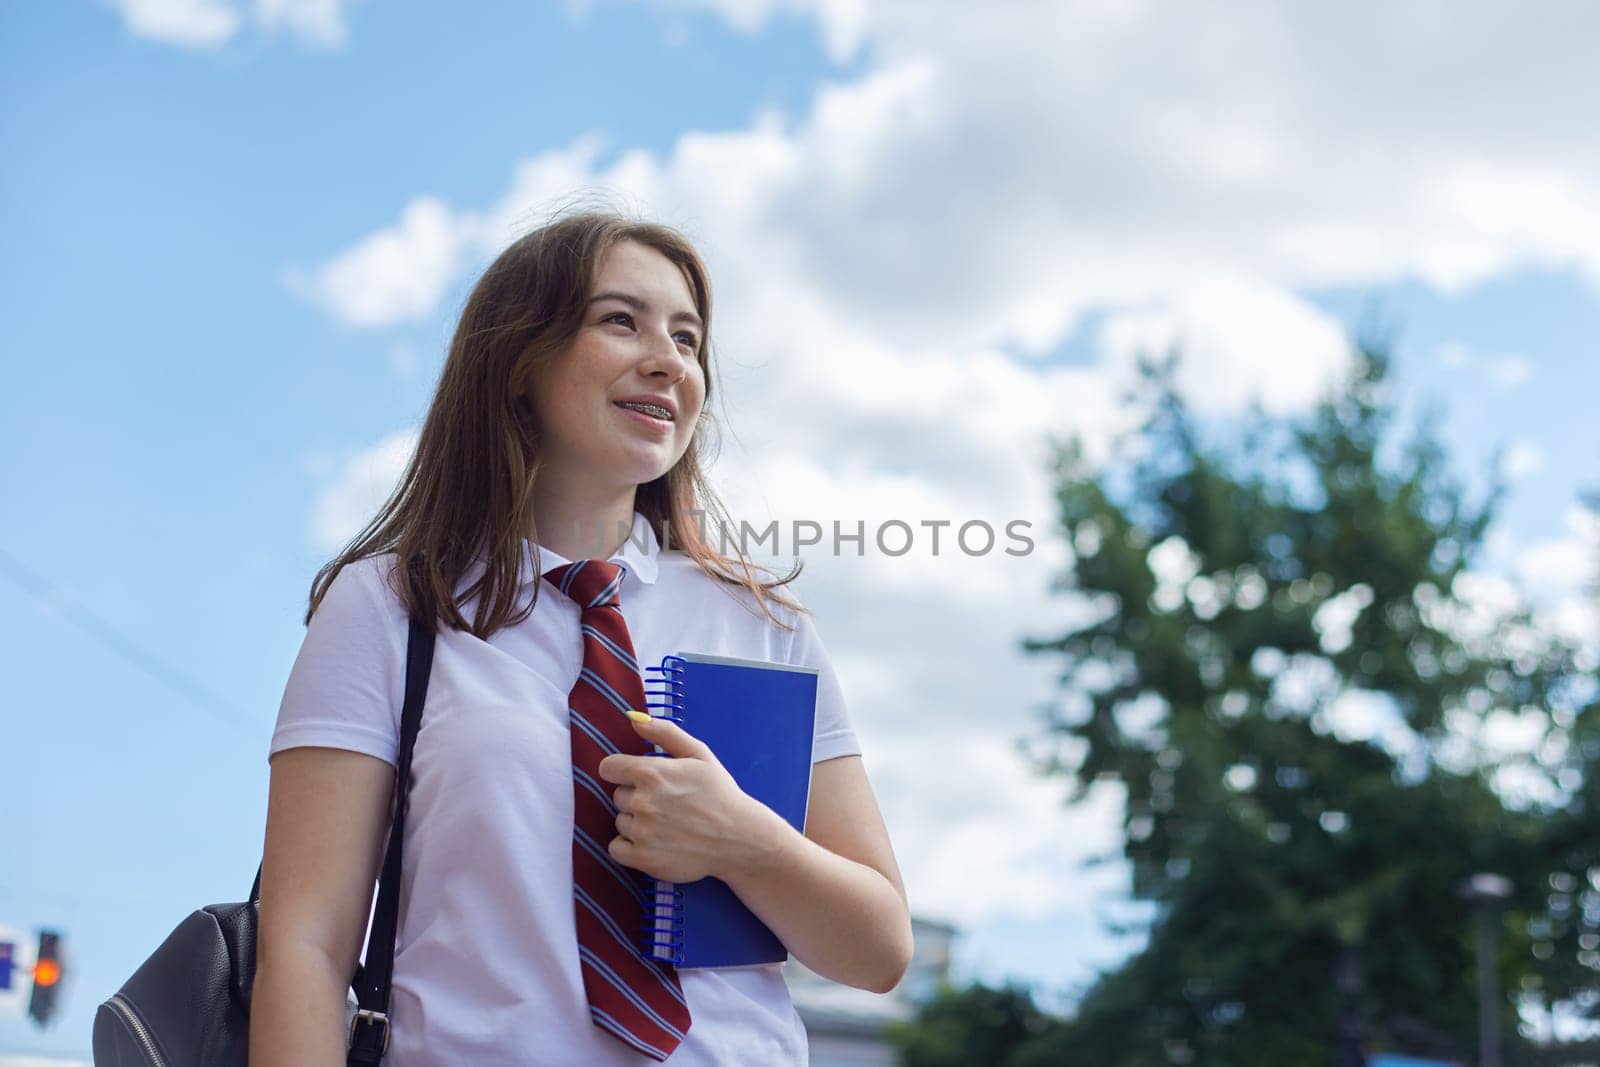 Portrait of smiling girl student of 17, 18 years old with braces on her teeth, copy space